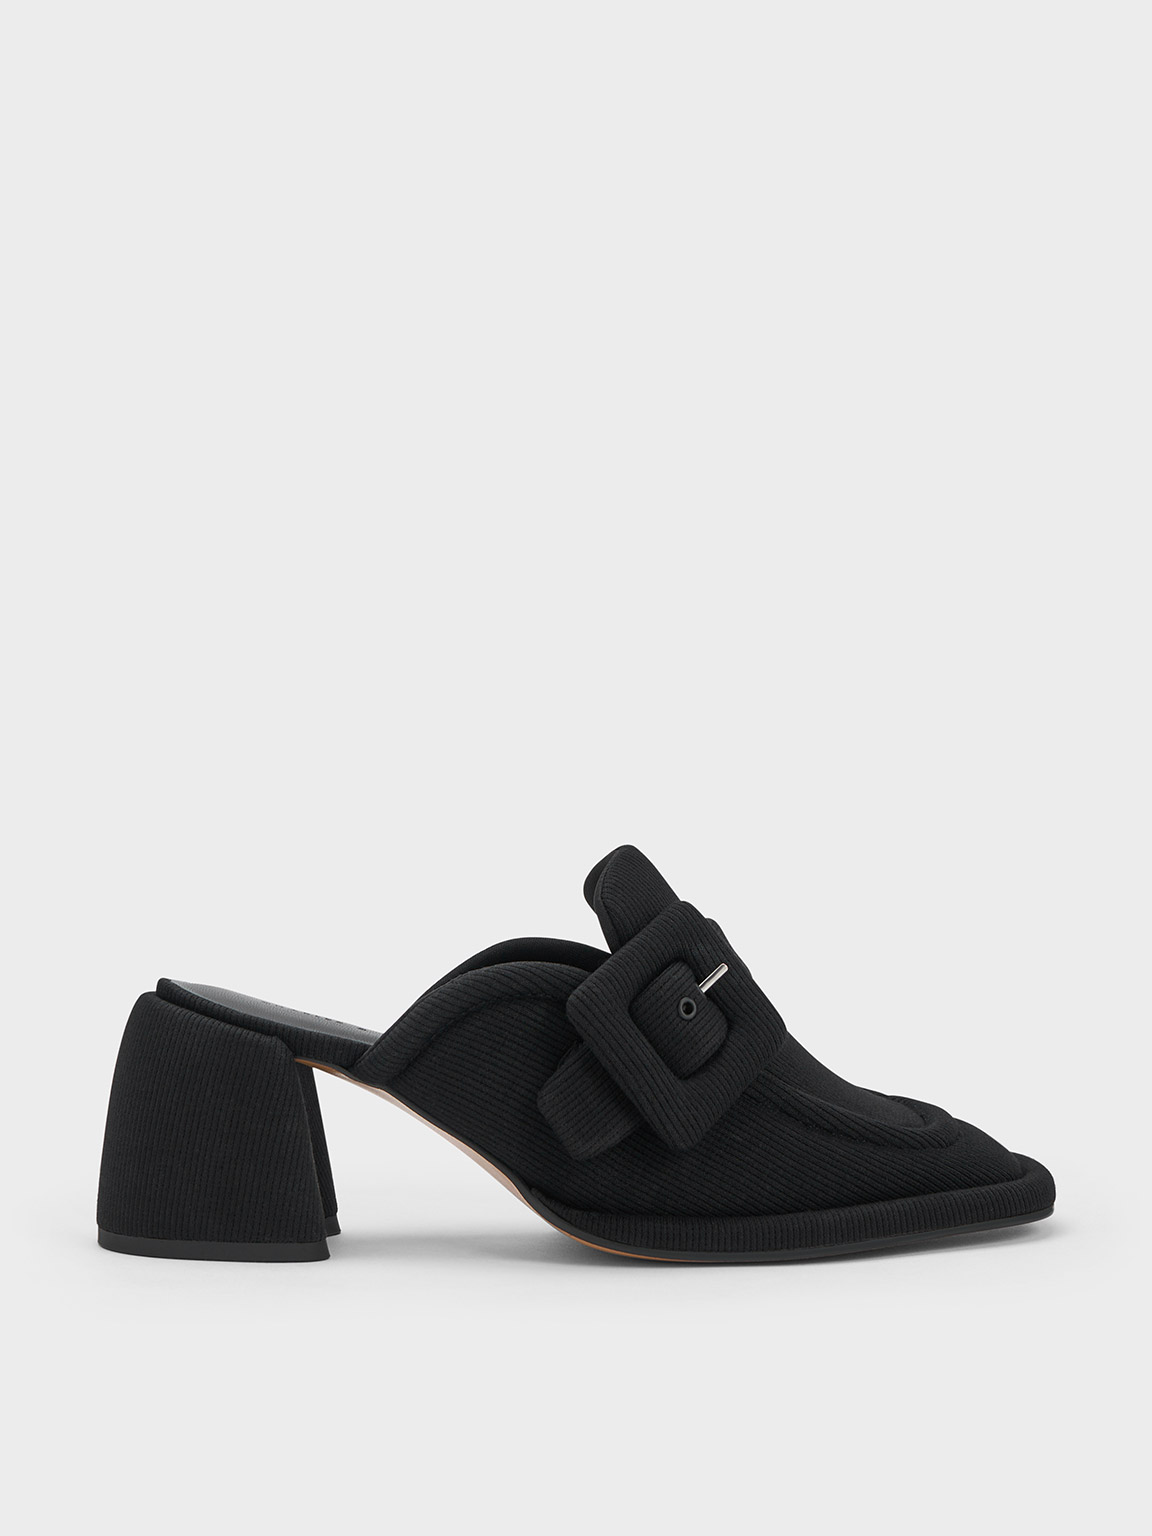 Charles & Keith Woven Buckled Loafer Mules In Black